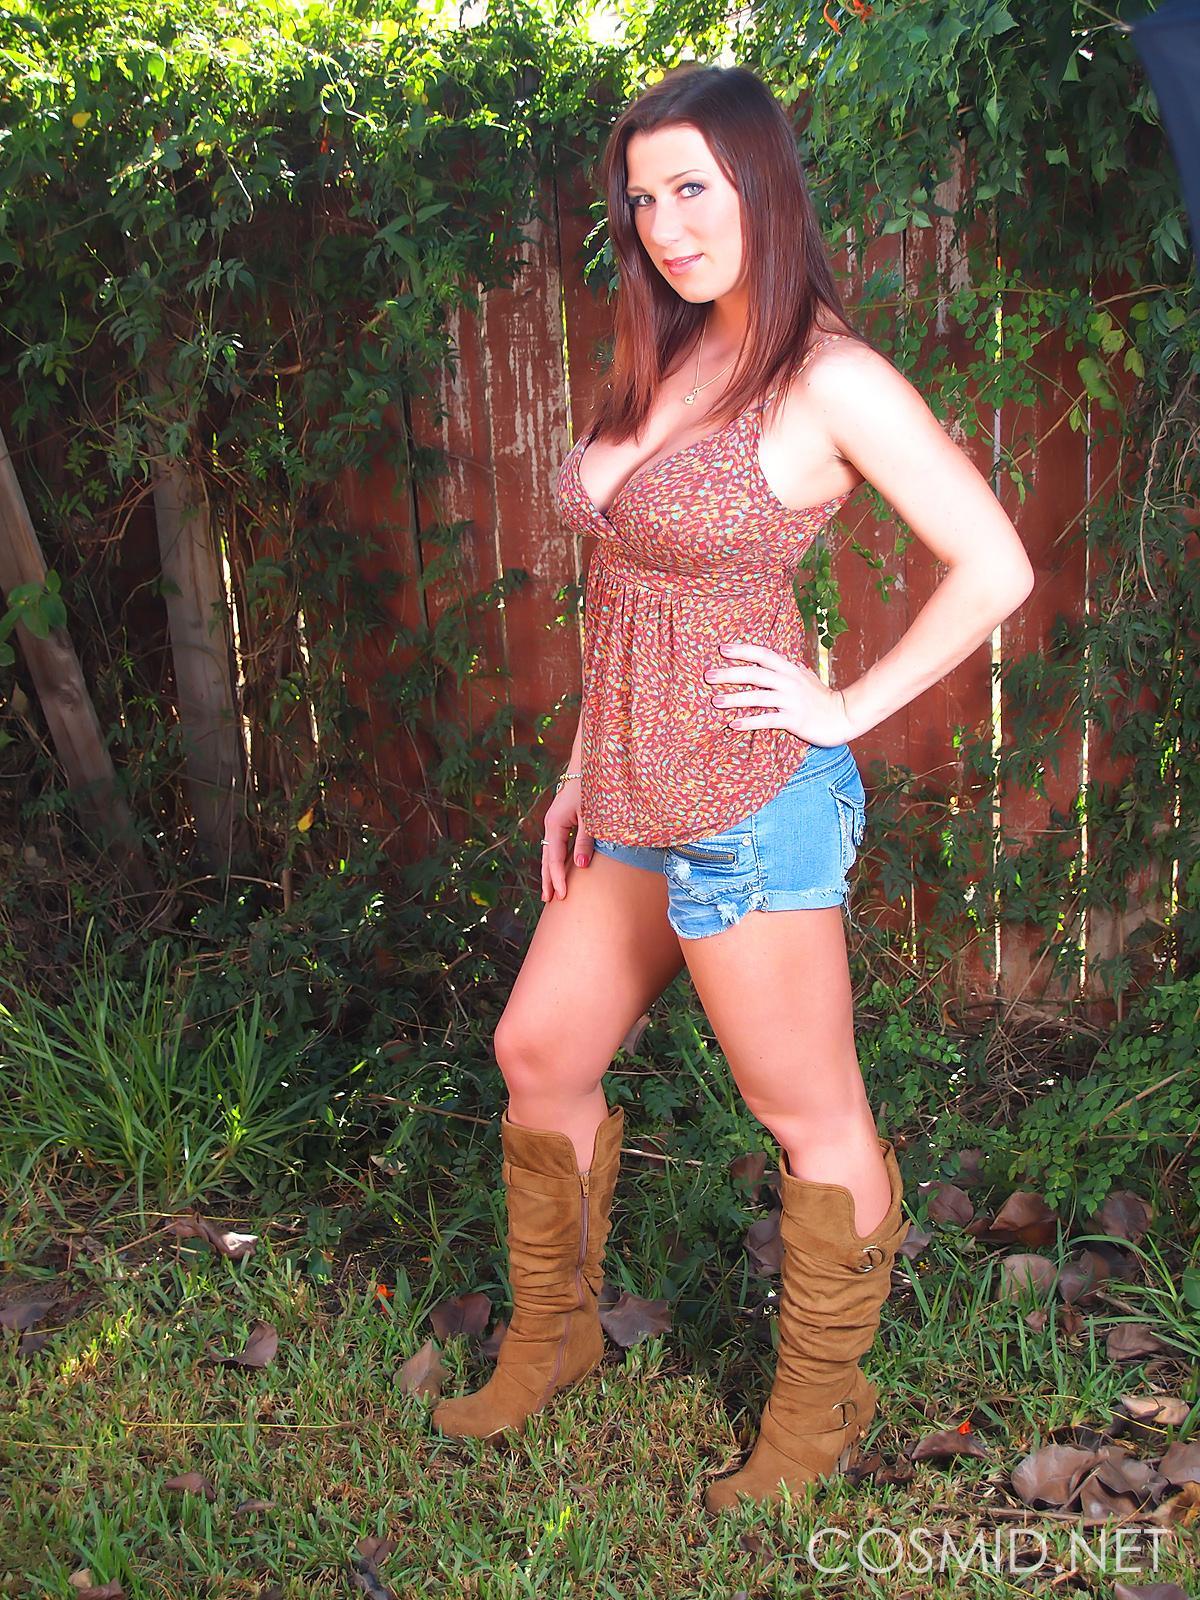 Busty girl Cherry strips down to her boots in the back yard #53774873